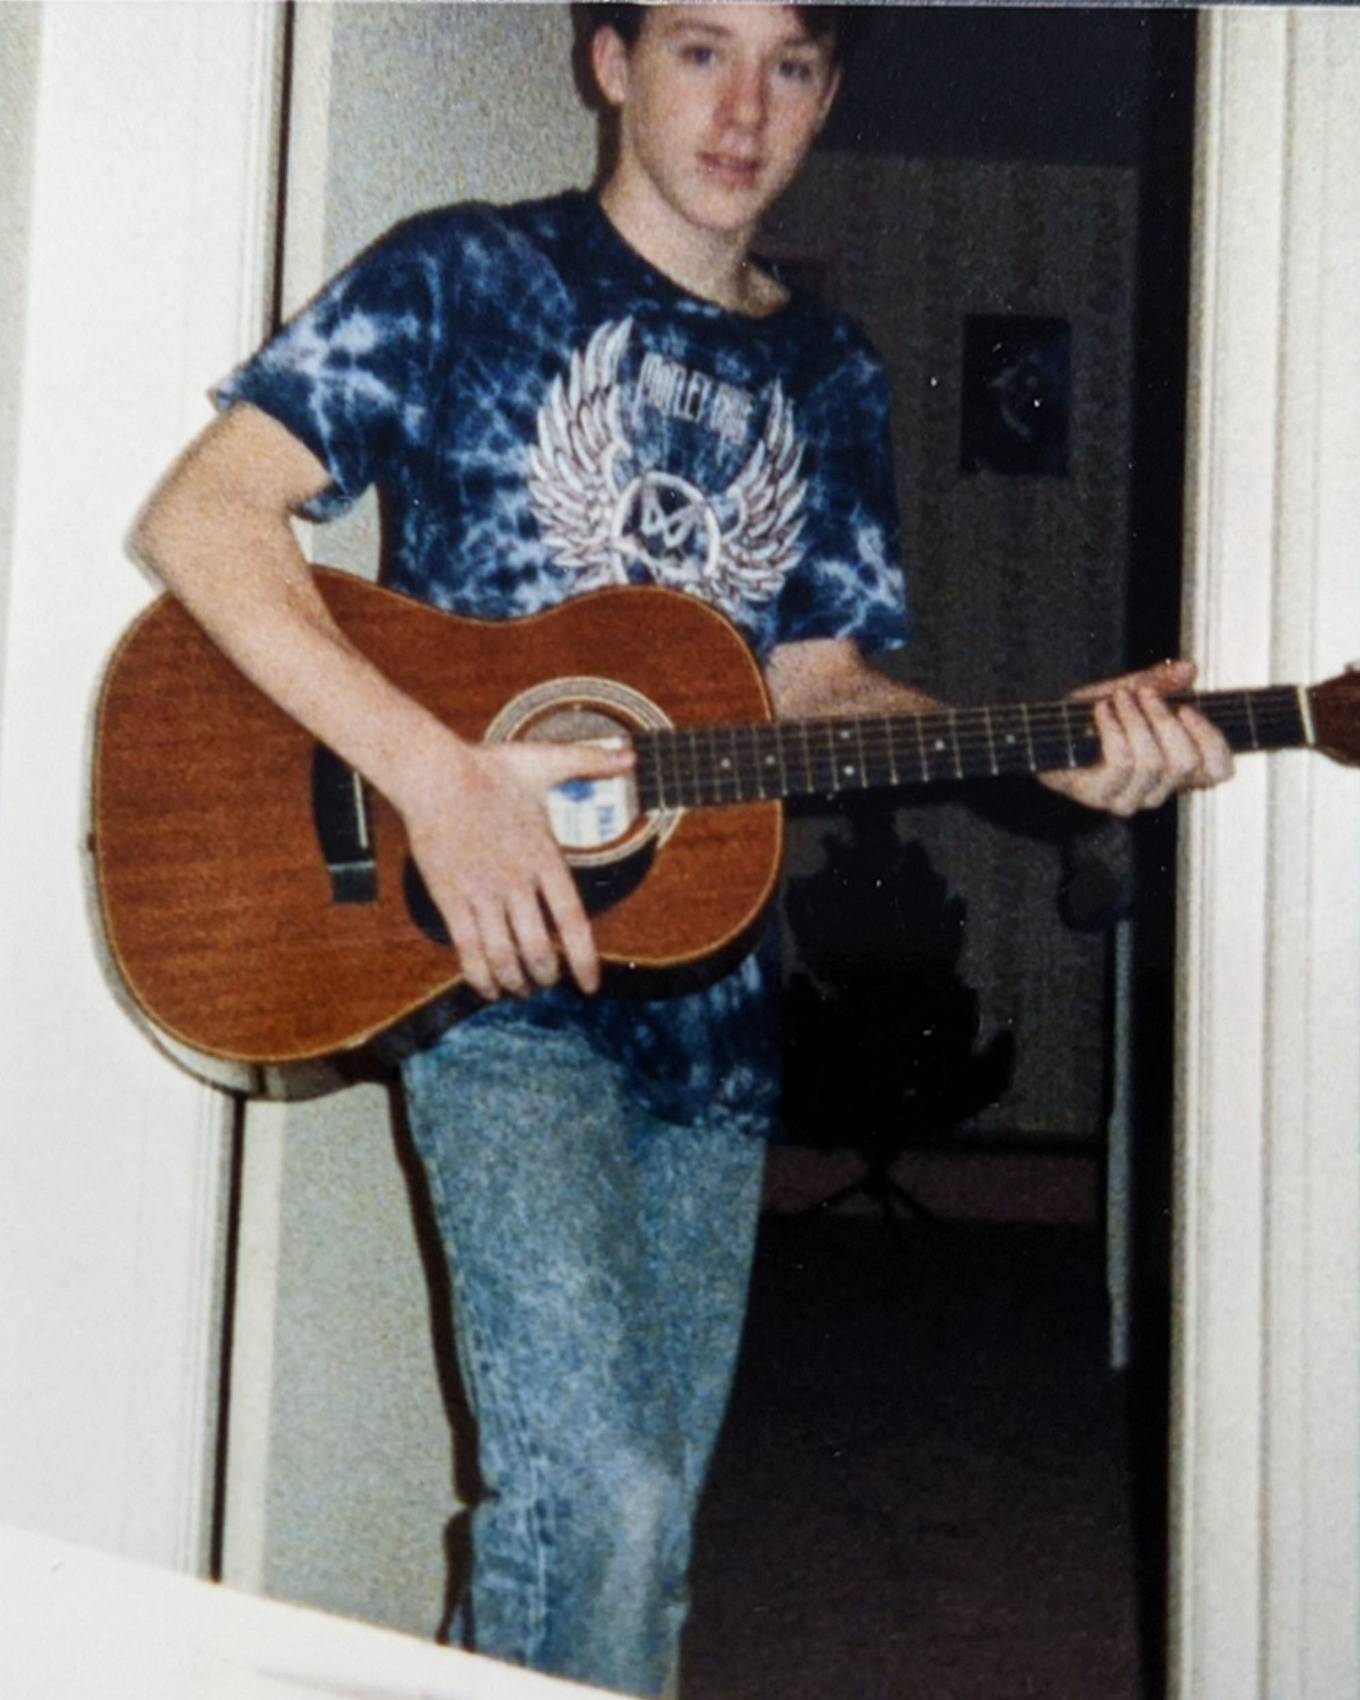 Mark Avery as a teen in 501® jeans holding a guitar